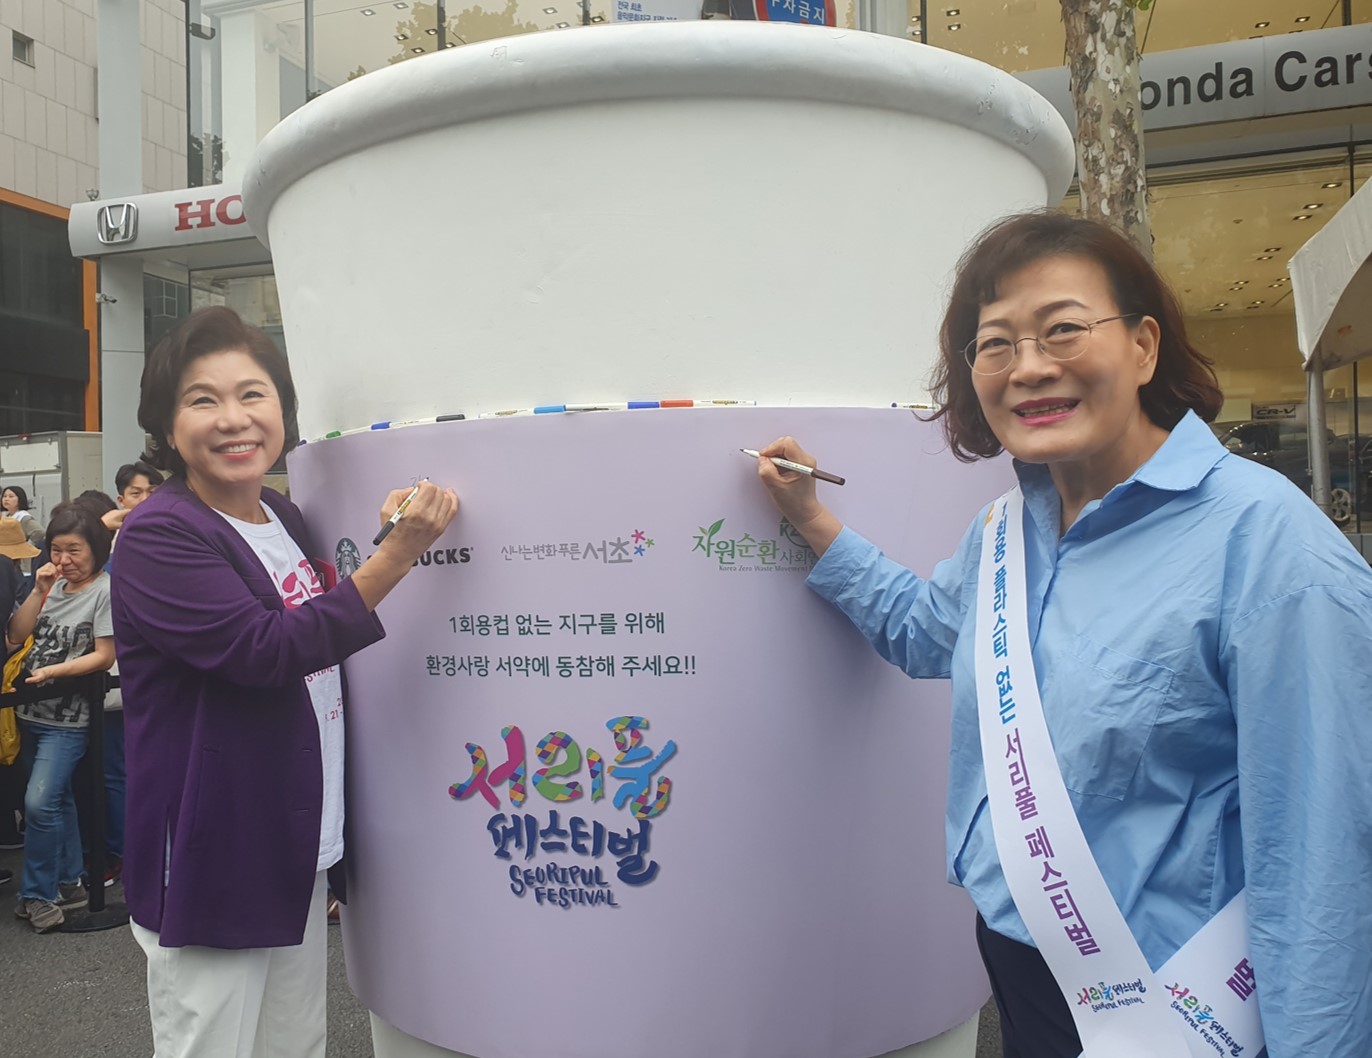 Two Korean women signing on a big reusable cup during the Seoripul Festival held in Seoul